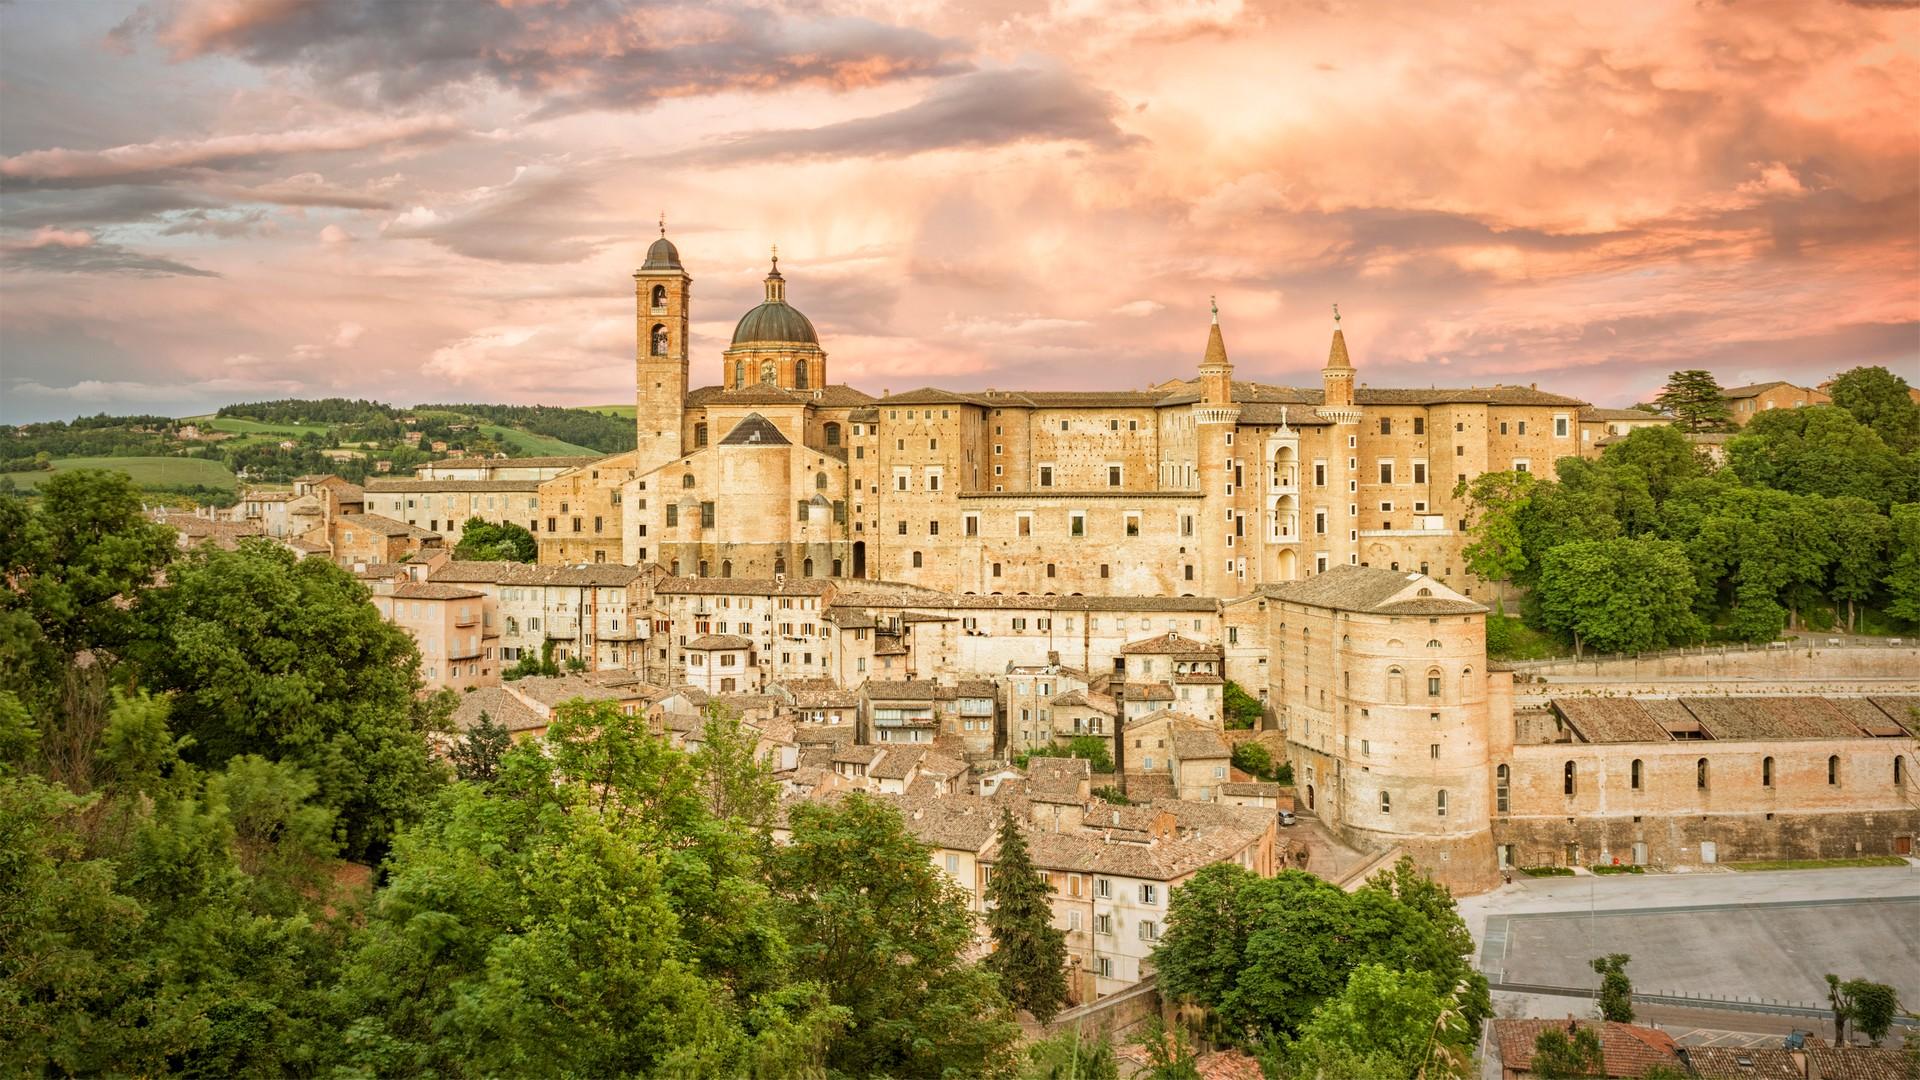 Architecture in Urbino at sunset time